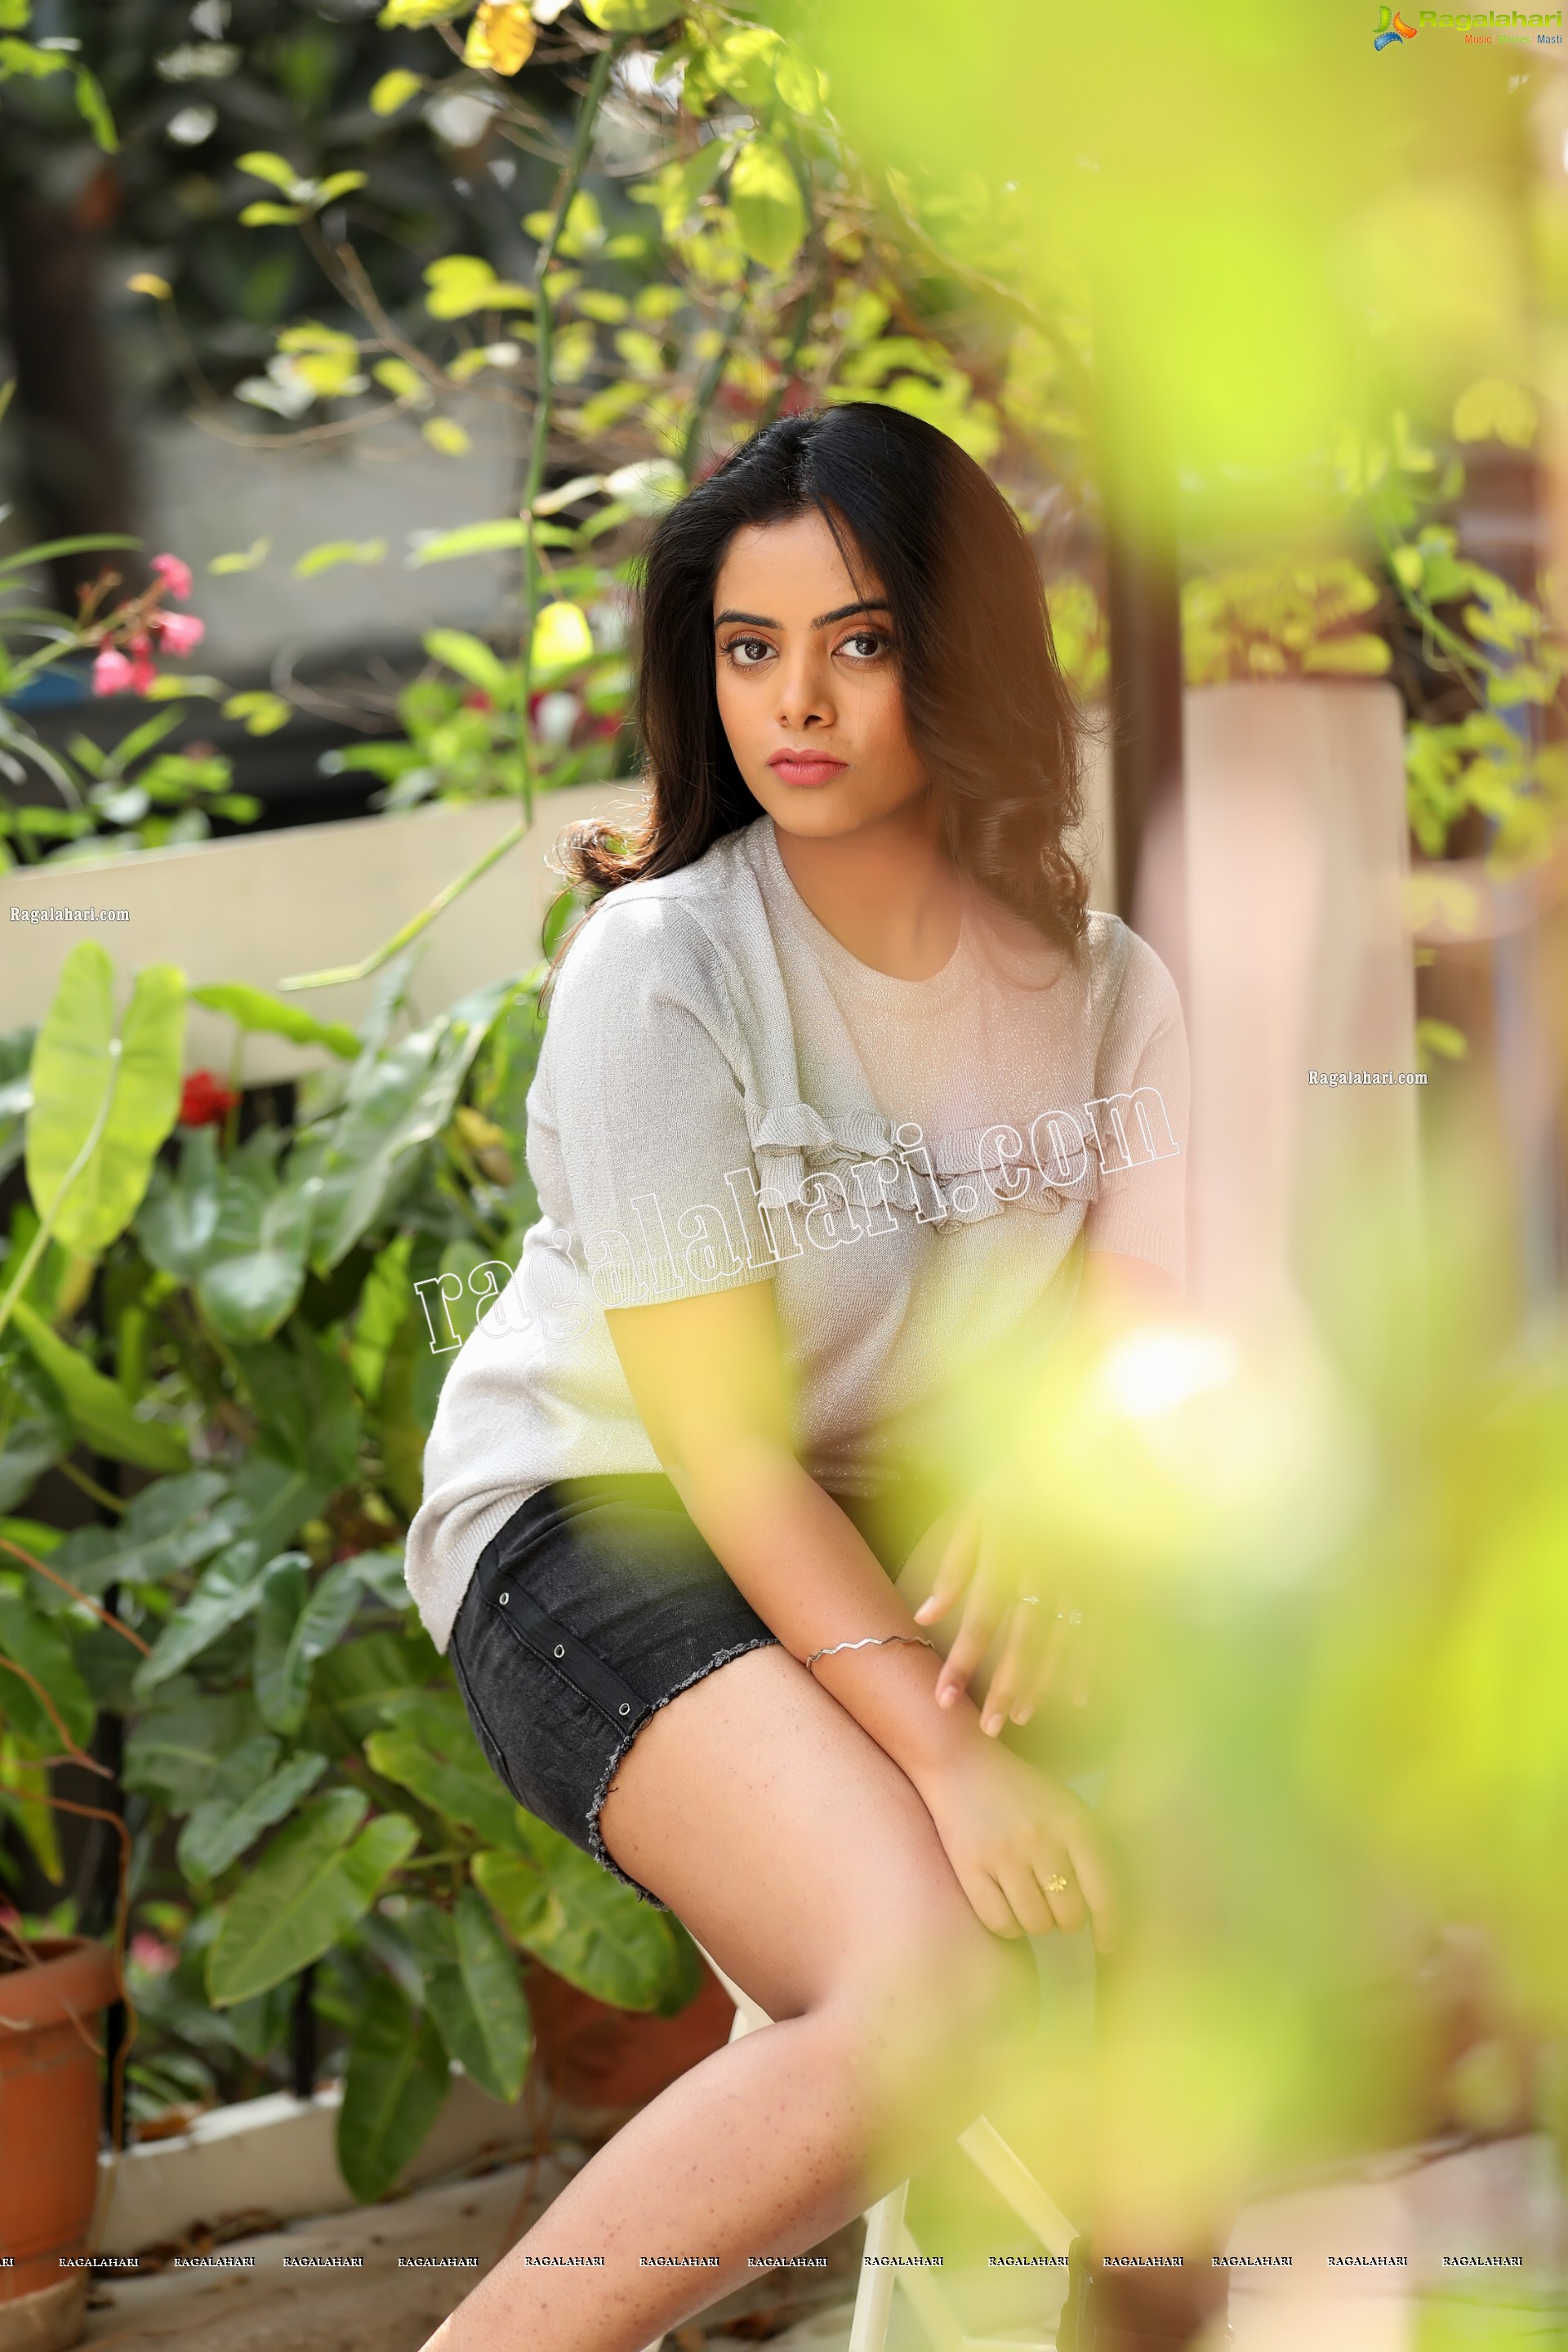 Sameera Reddy G in Gray T-Shirt and Black Shorts Exclusive Photo Shoot